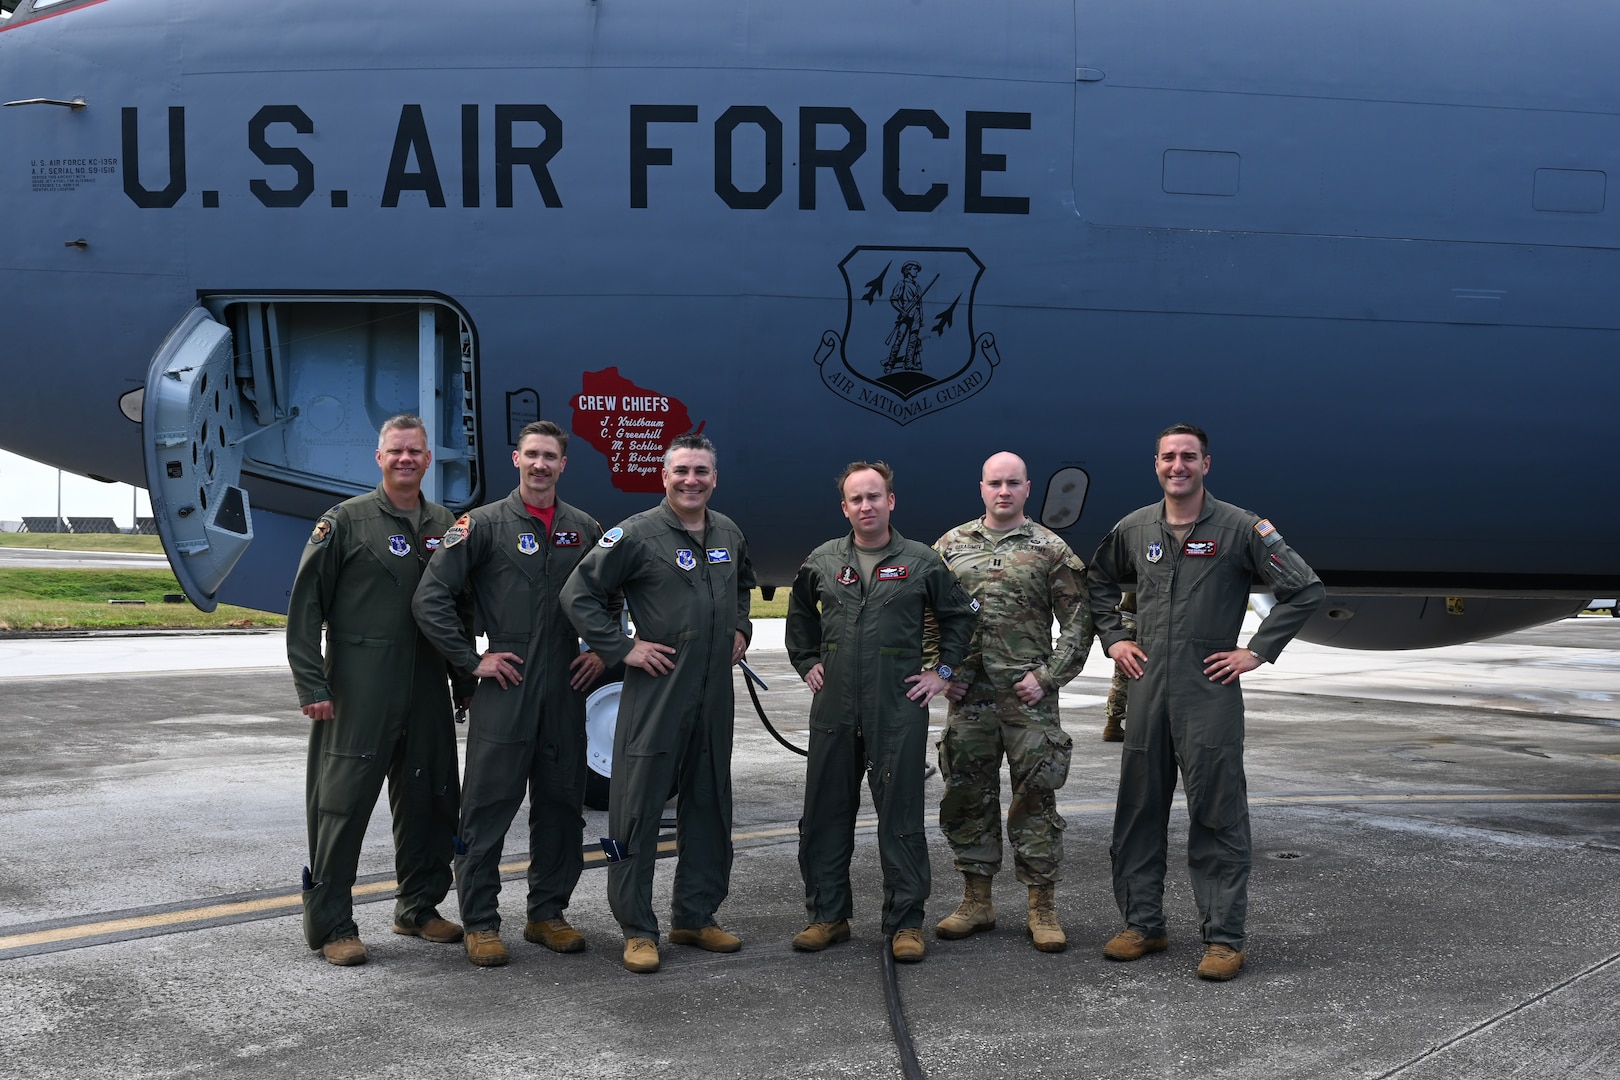 Maj. Gen. Paul Knapp, third from left, Wisconsin’s adjutant general, and Capt. Mark Gerasimov, Knapp’s aide de camp, second from right, with deployed members of the Wisconsin Air National Guard’s 128th Air Refueling Wing at Andersen Air Force Base in Guam Feb. 3, 2023. The deployed Airmen are supporting the 506th Expeditionary Air Refueling Group, which provides the aerial refueling and airlift capabilities that support critical U.S. Indo-Pacific Command missions.